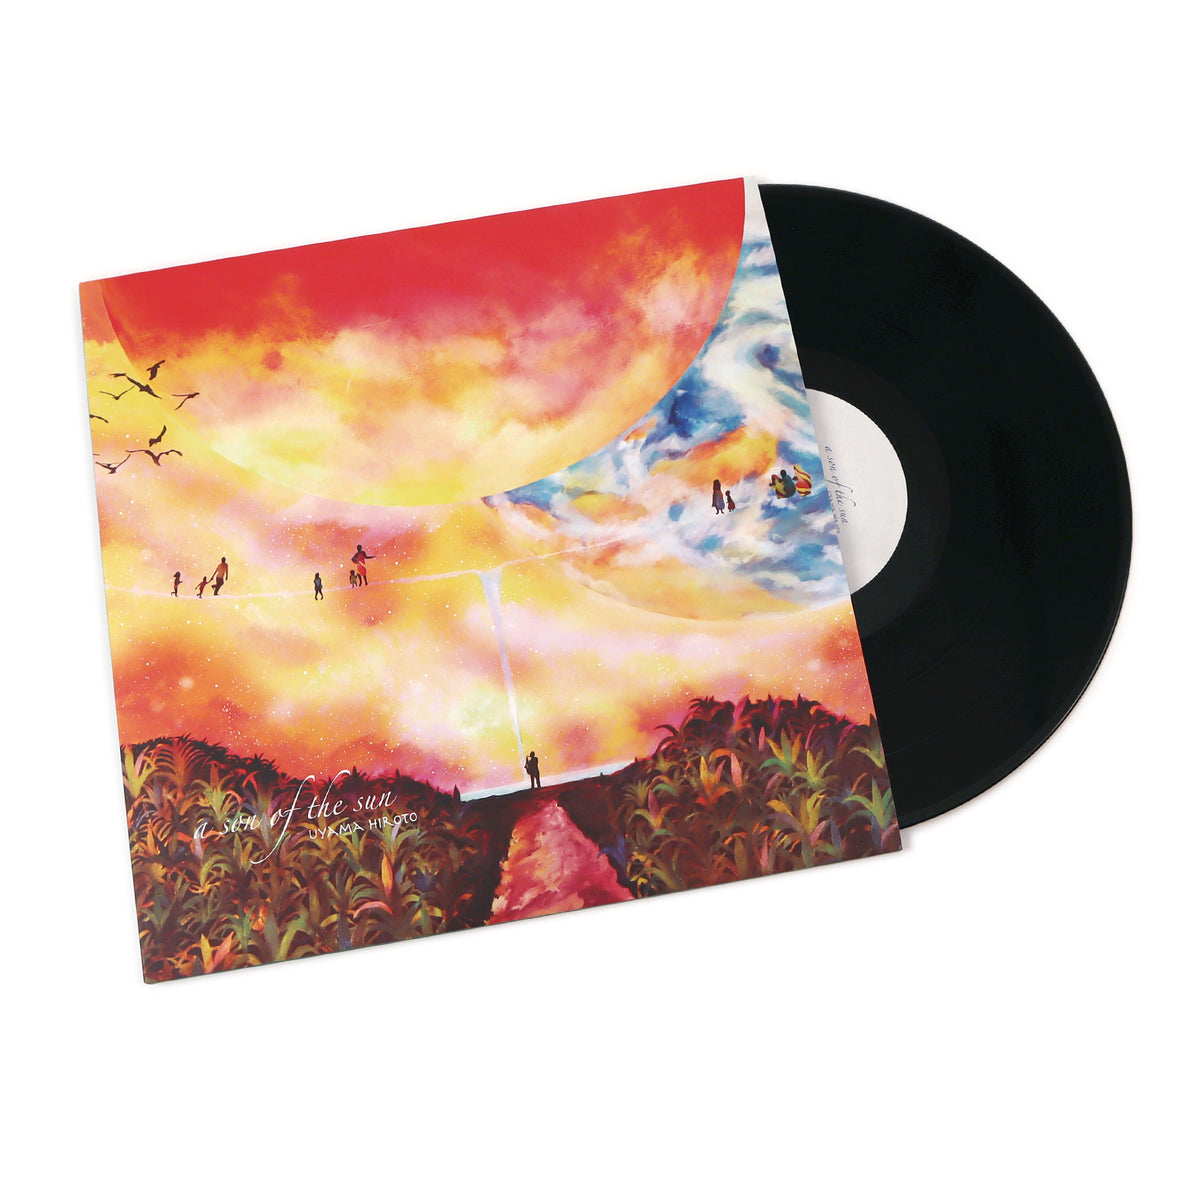 Uyama Hiroto: A Son Of The Sun (Nujabes) Vinyl 2LP —